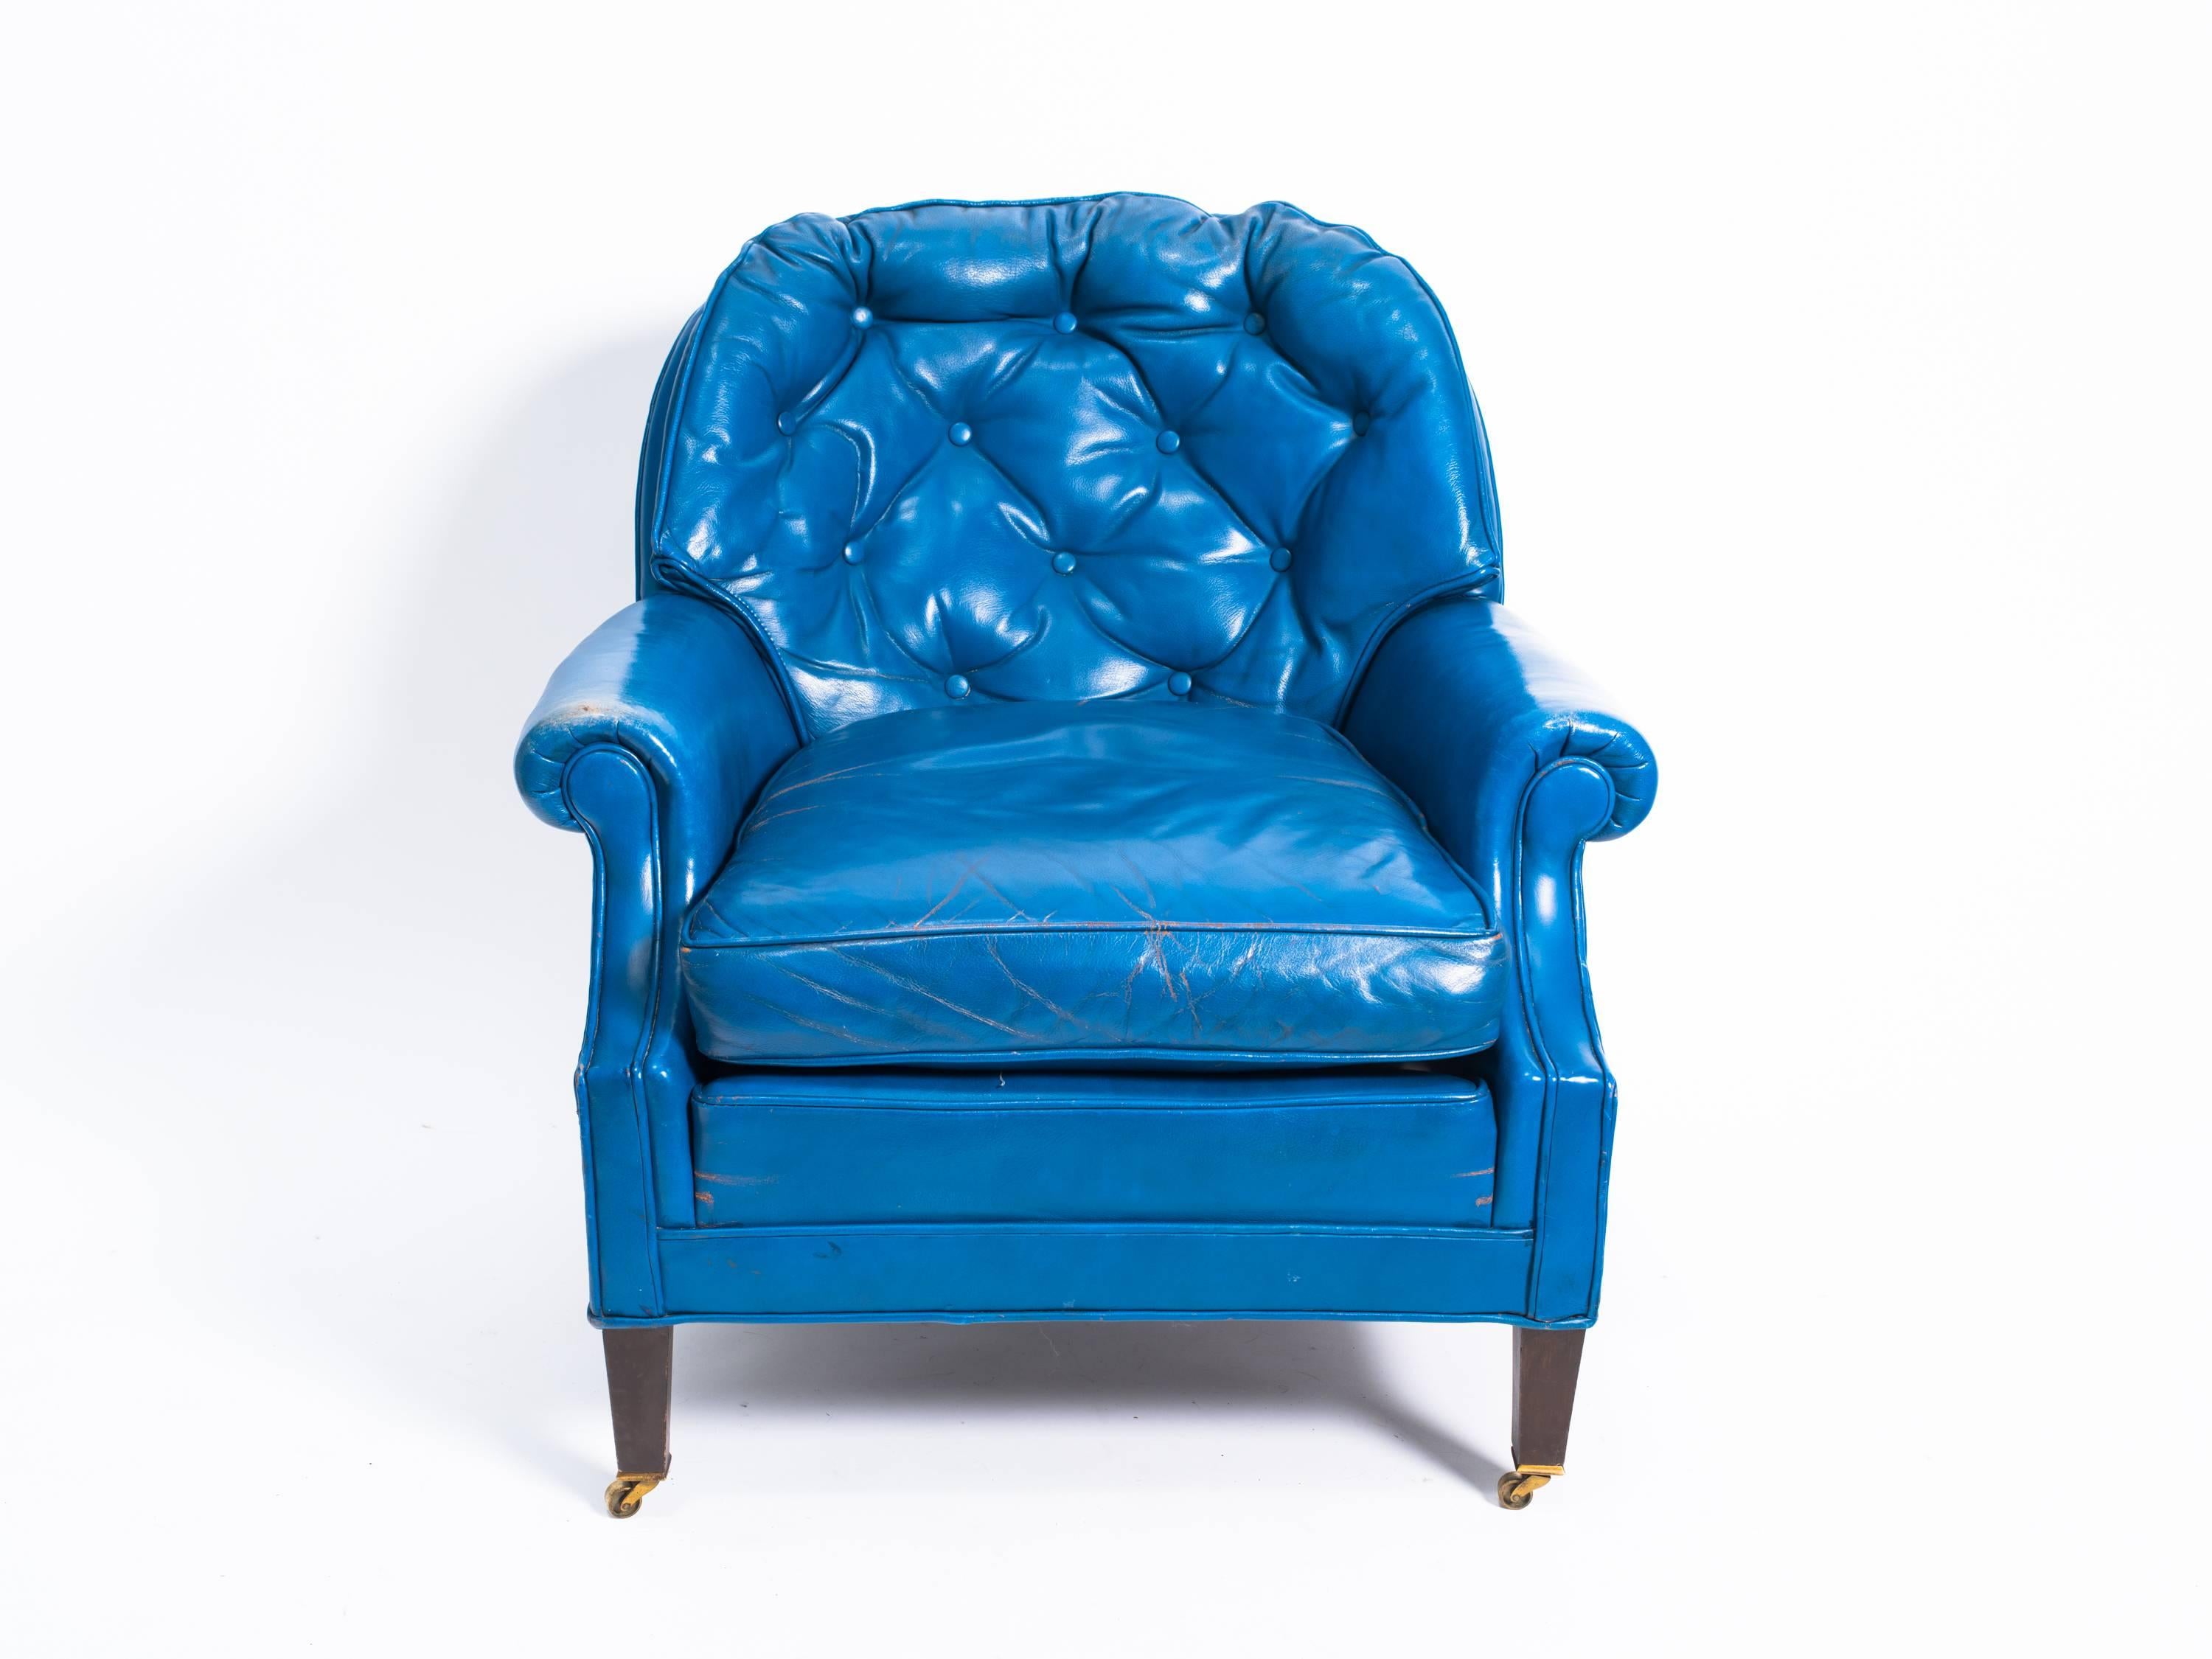 Pair of distressed blue leather lounge chairs with a single ottoman.